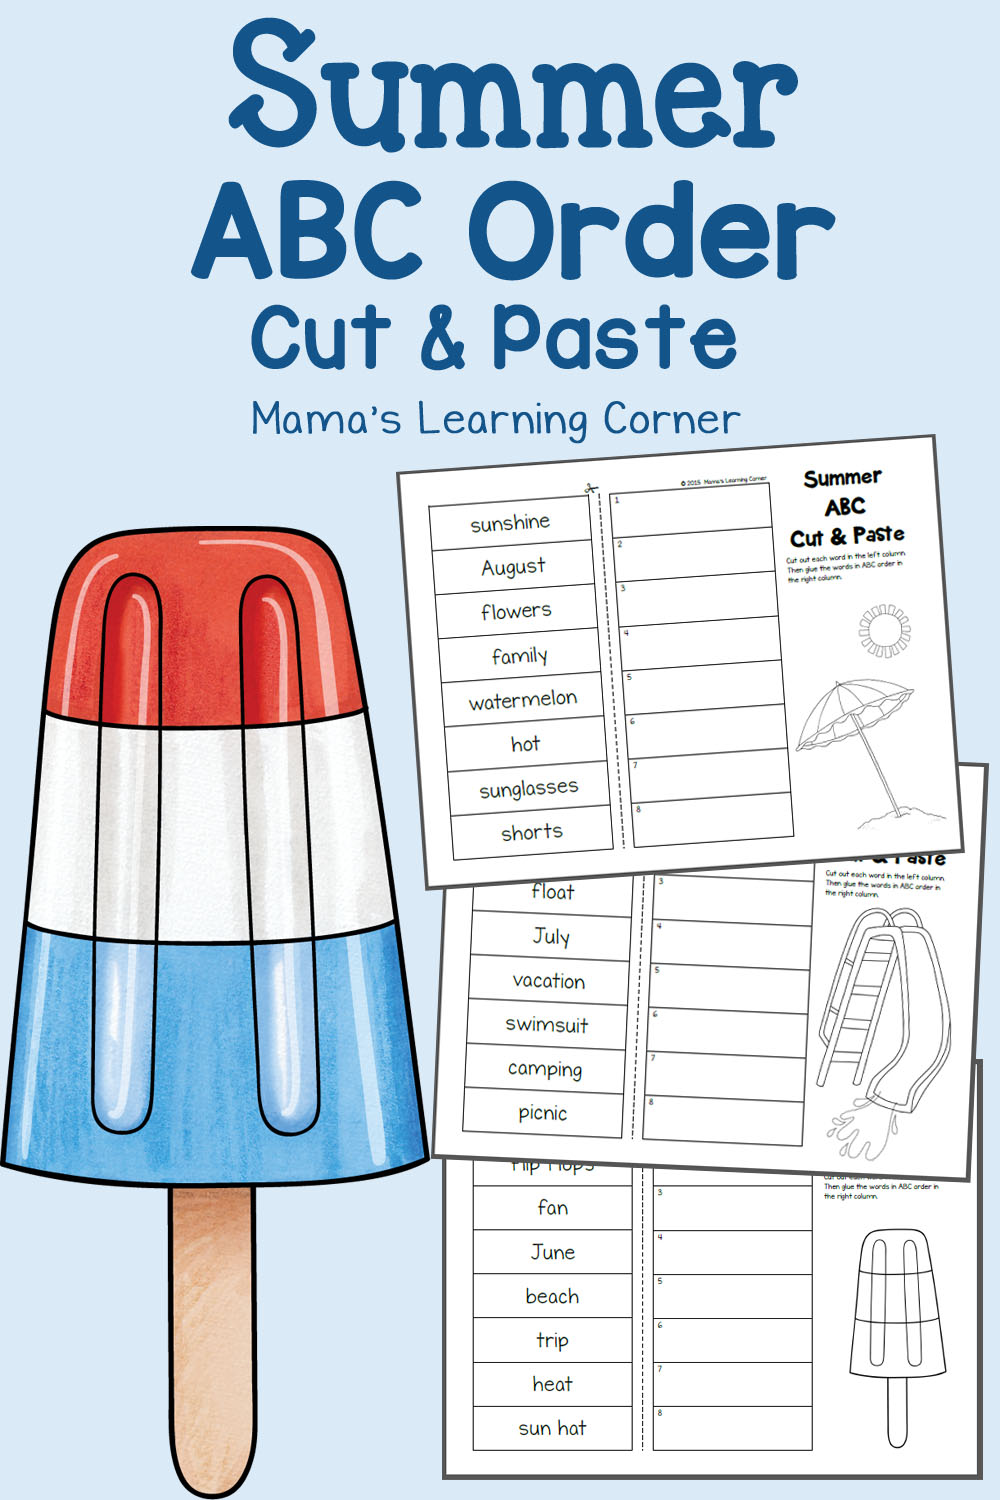 Summer Cut and Paste: ABC Order Worksheets - Mamas Learning Corner